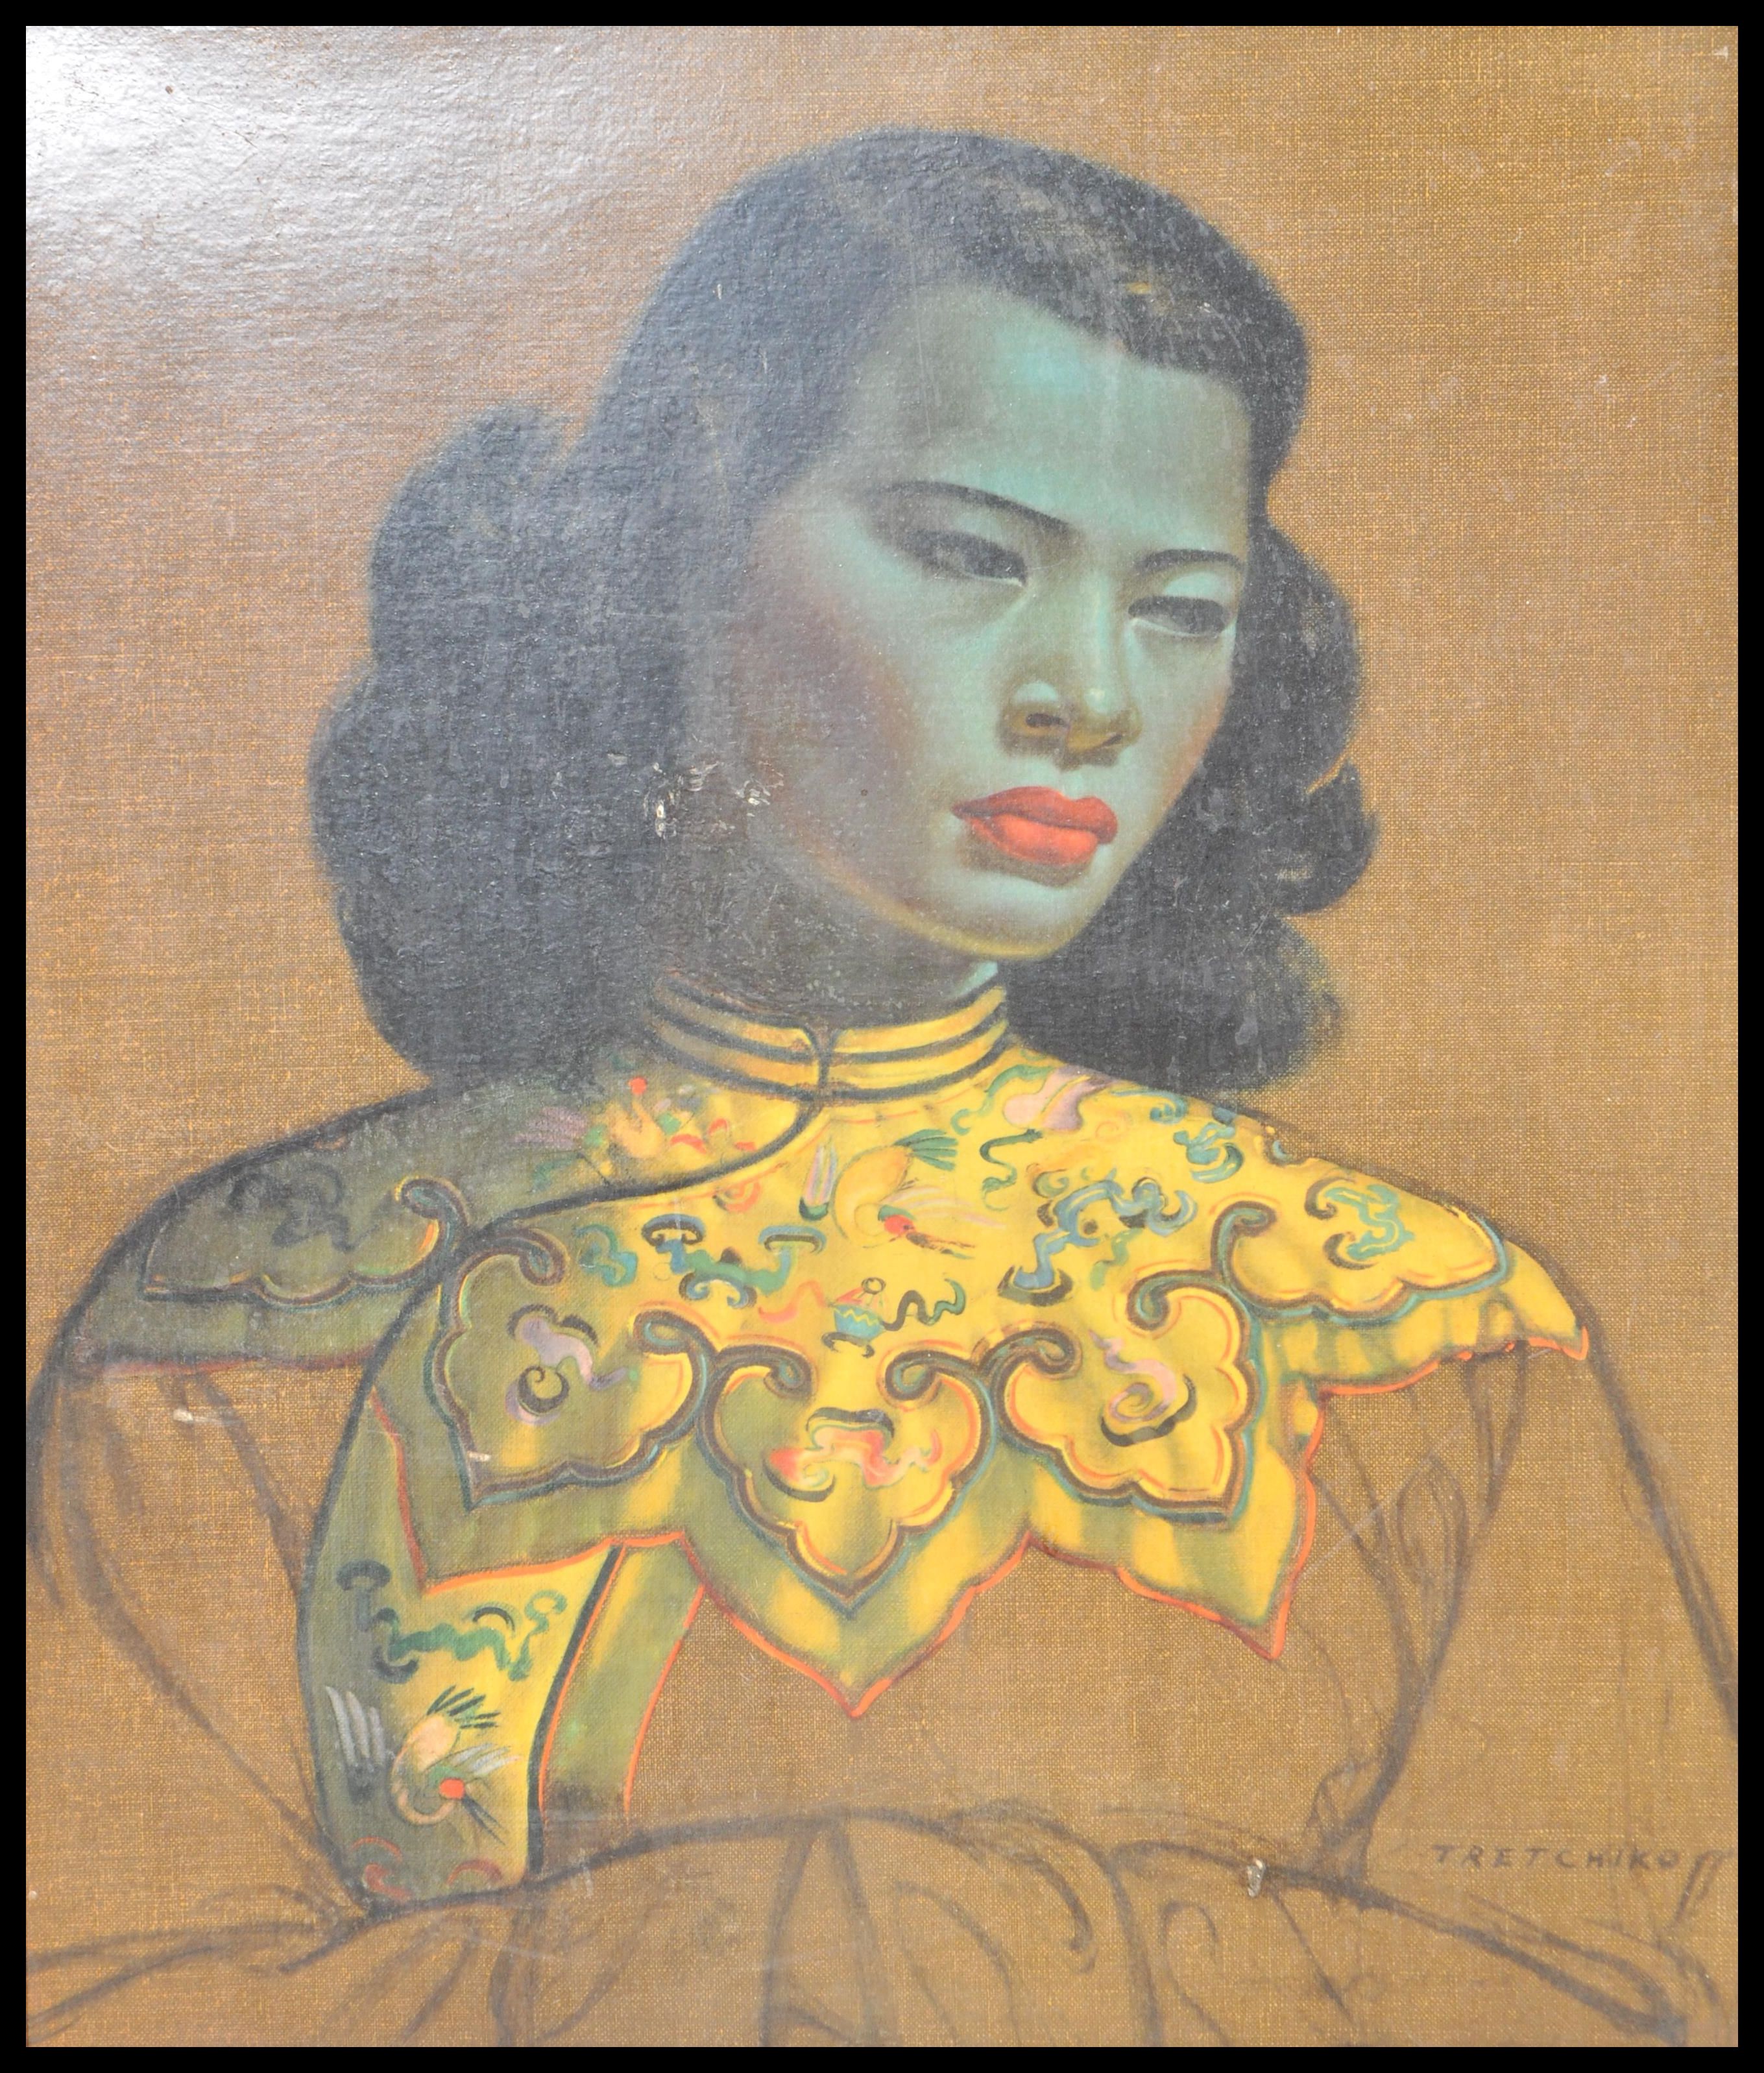 A vintage retro mid 20th century Vladimir Tretchikoff print on board of The Green Lady, also known